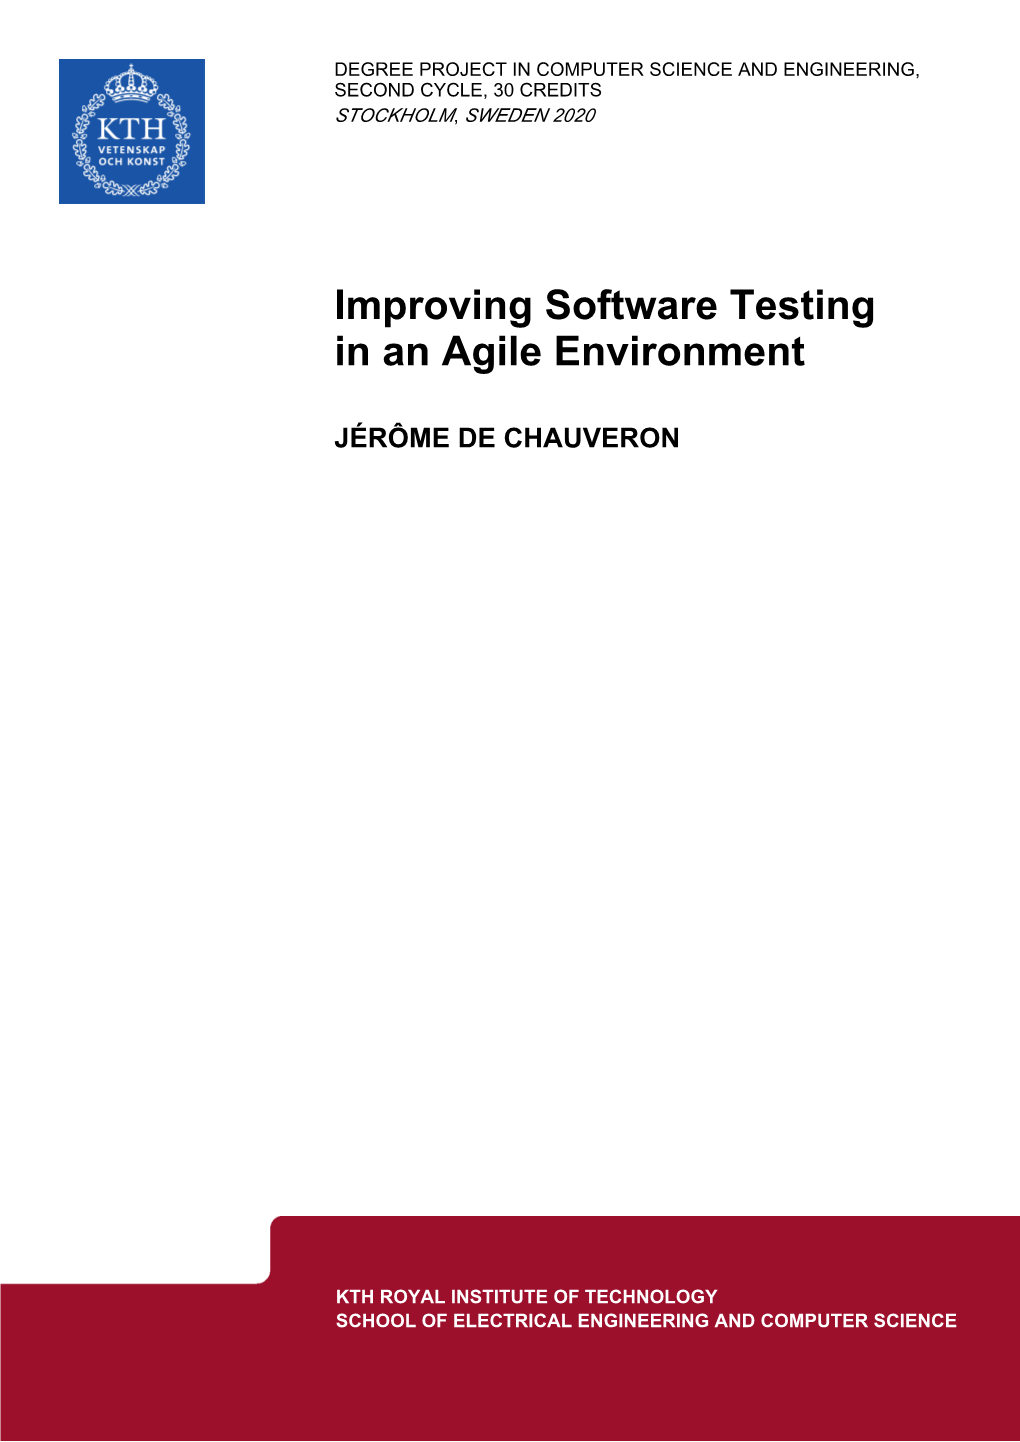 Improving Software Testing in an Agile Environment